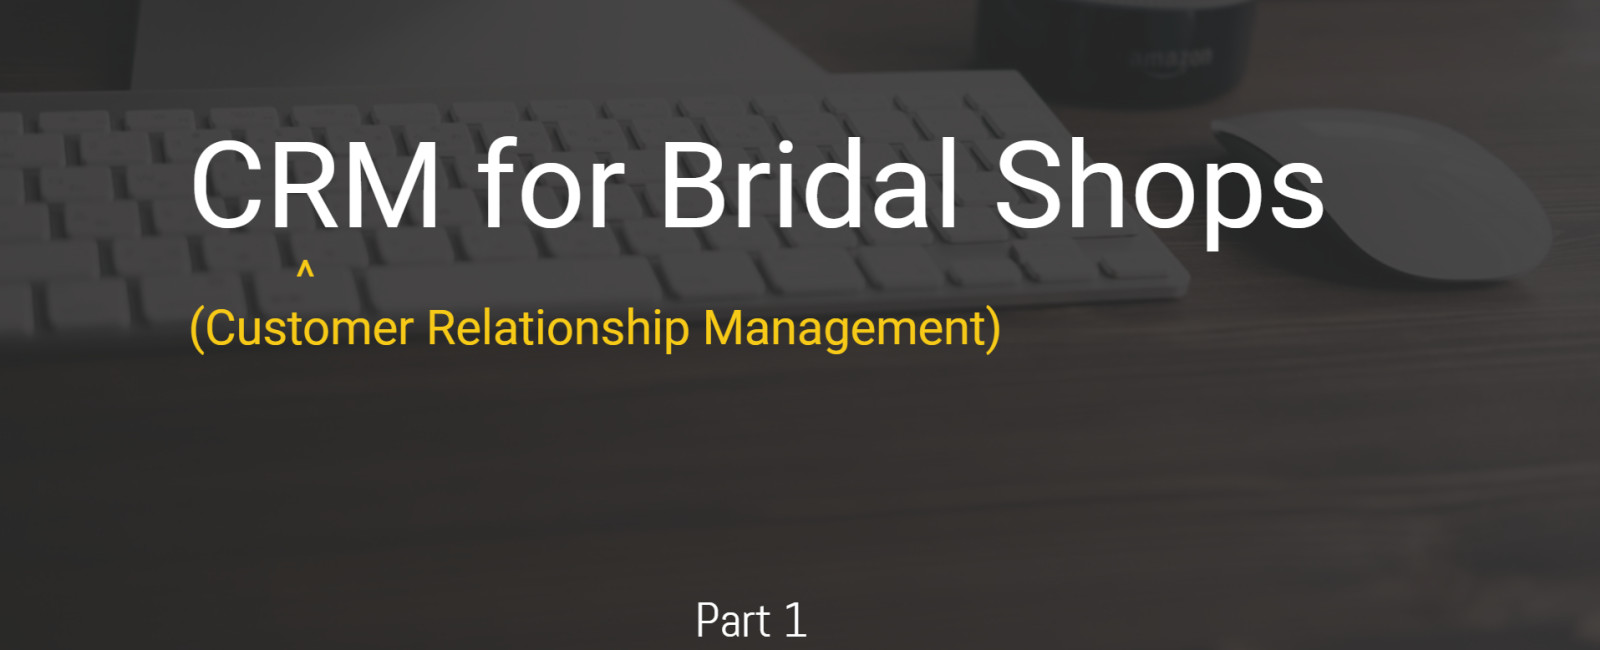 Why CRM Matters for Bridal Shops - Introduction